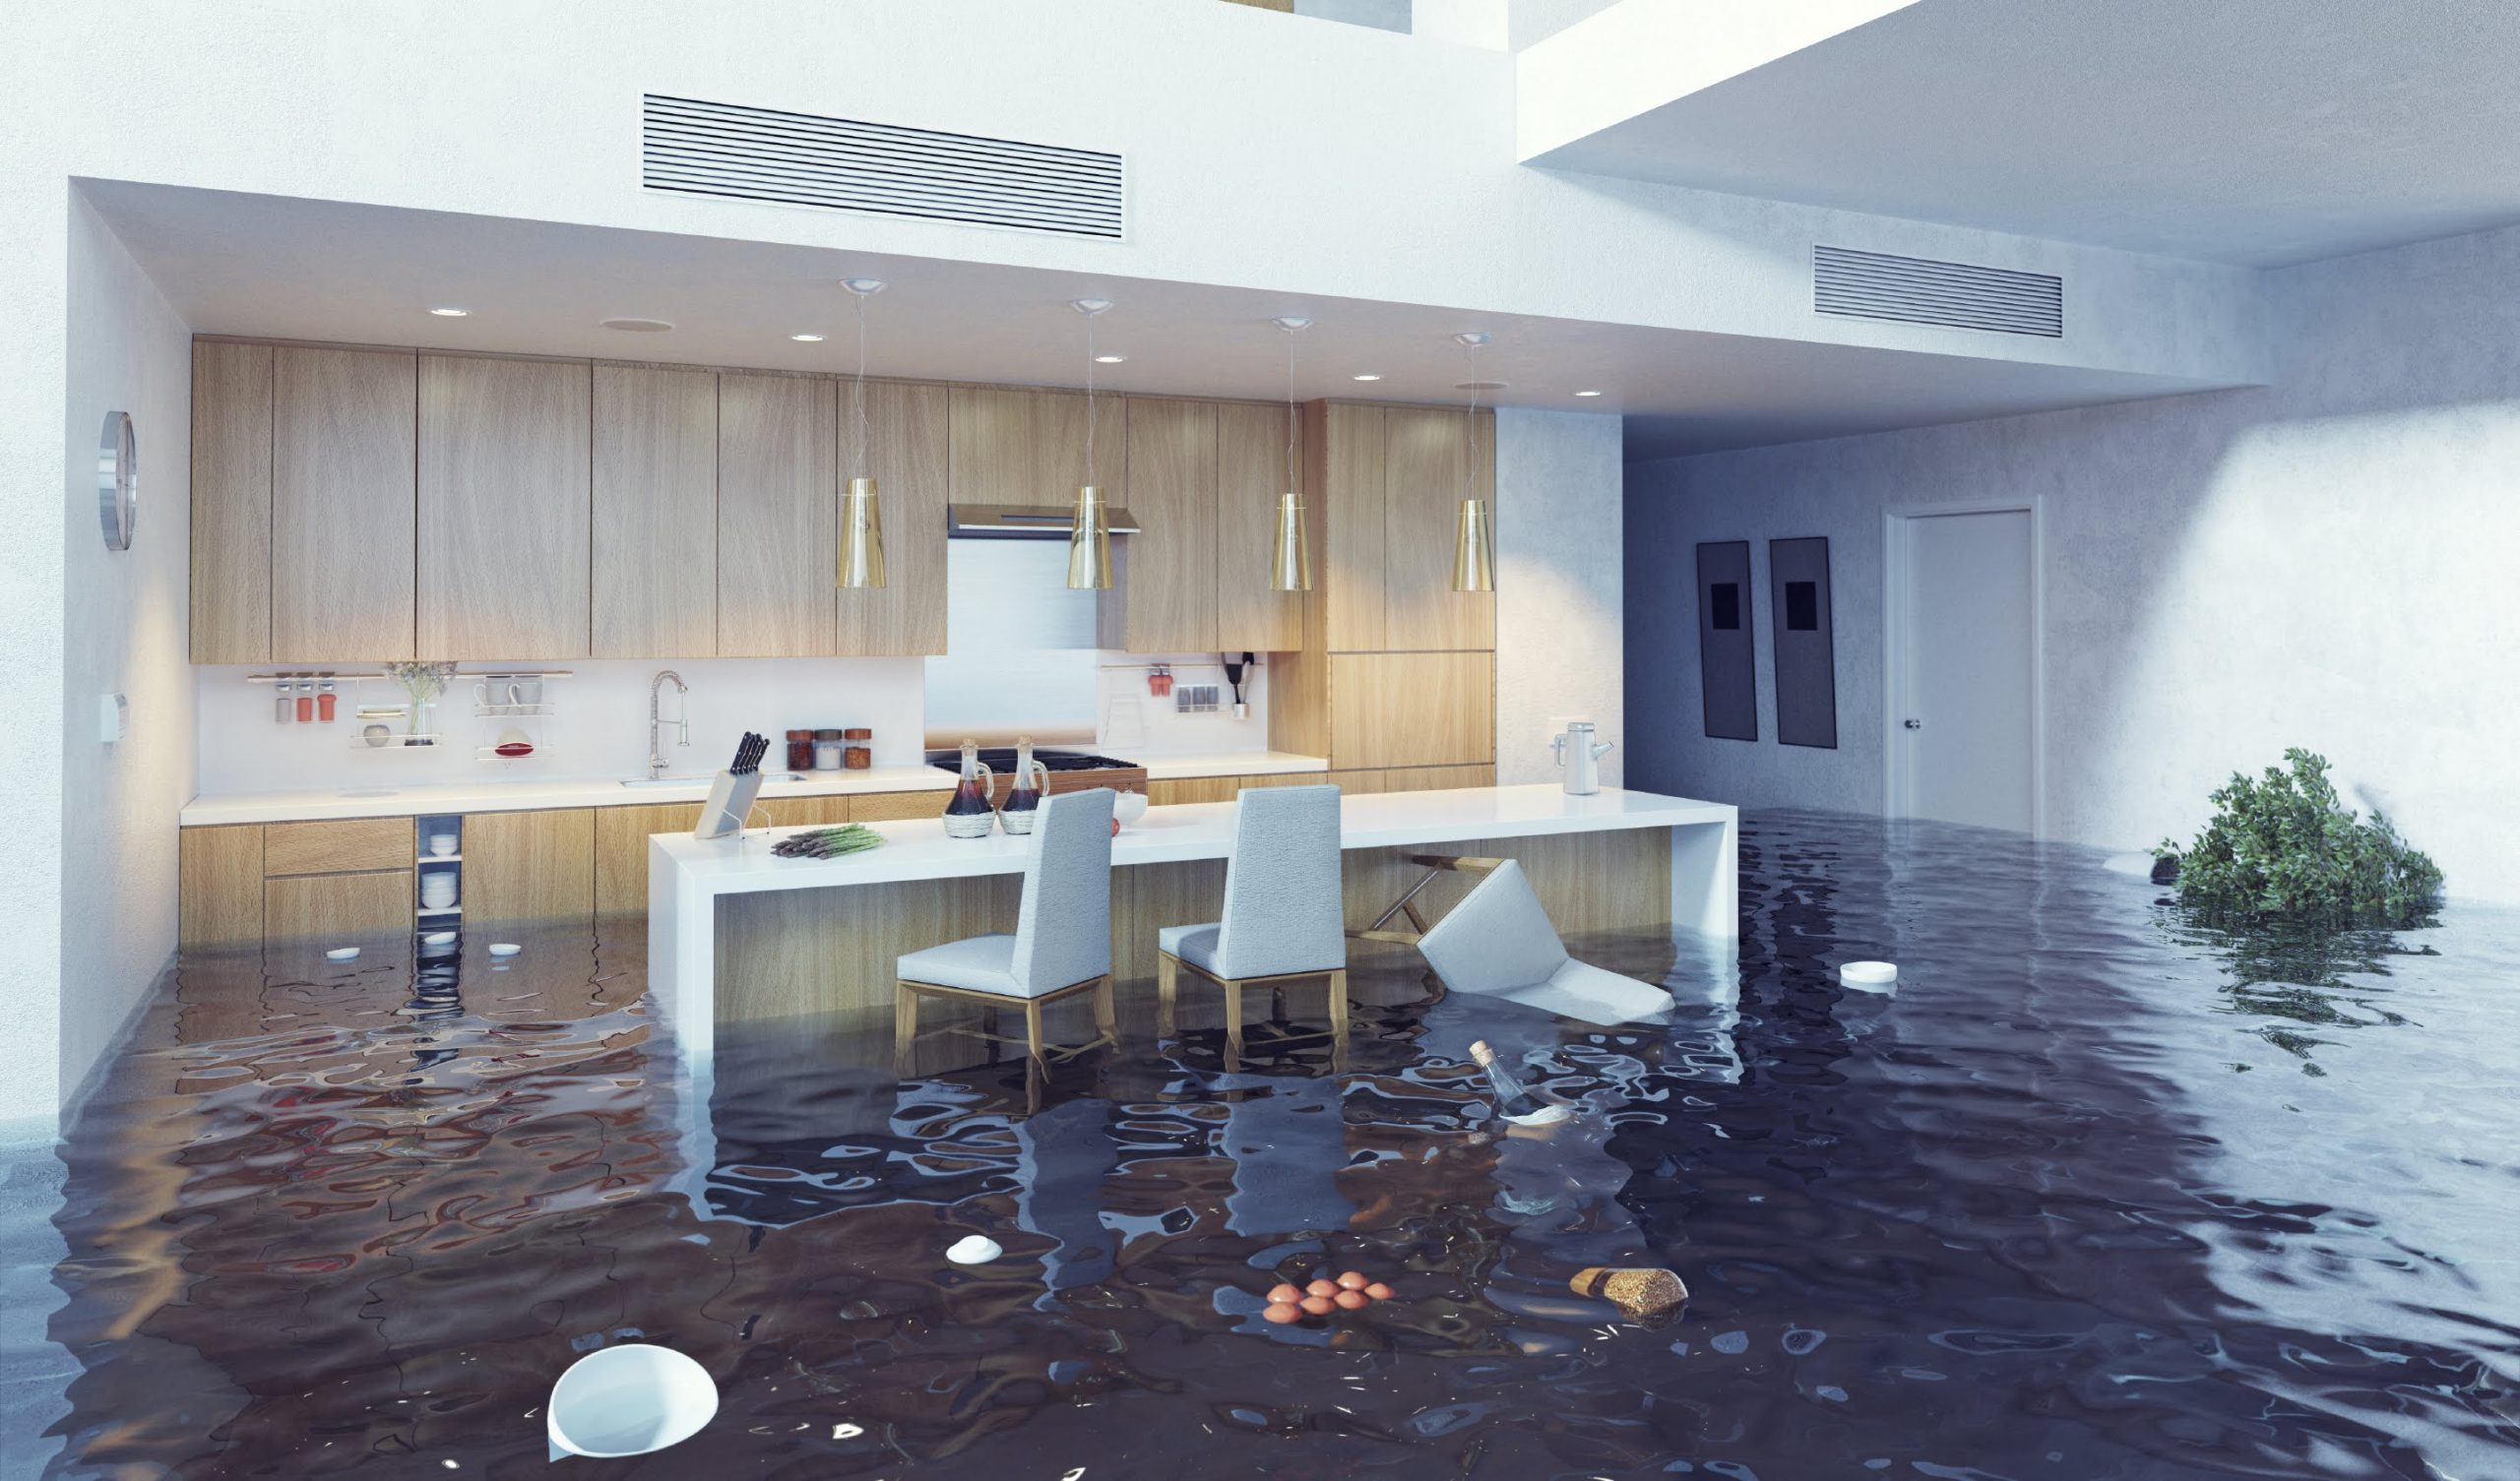 Why Should I Begin The Water Damage Cleanup Process Immediately?